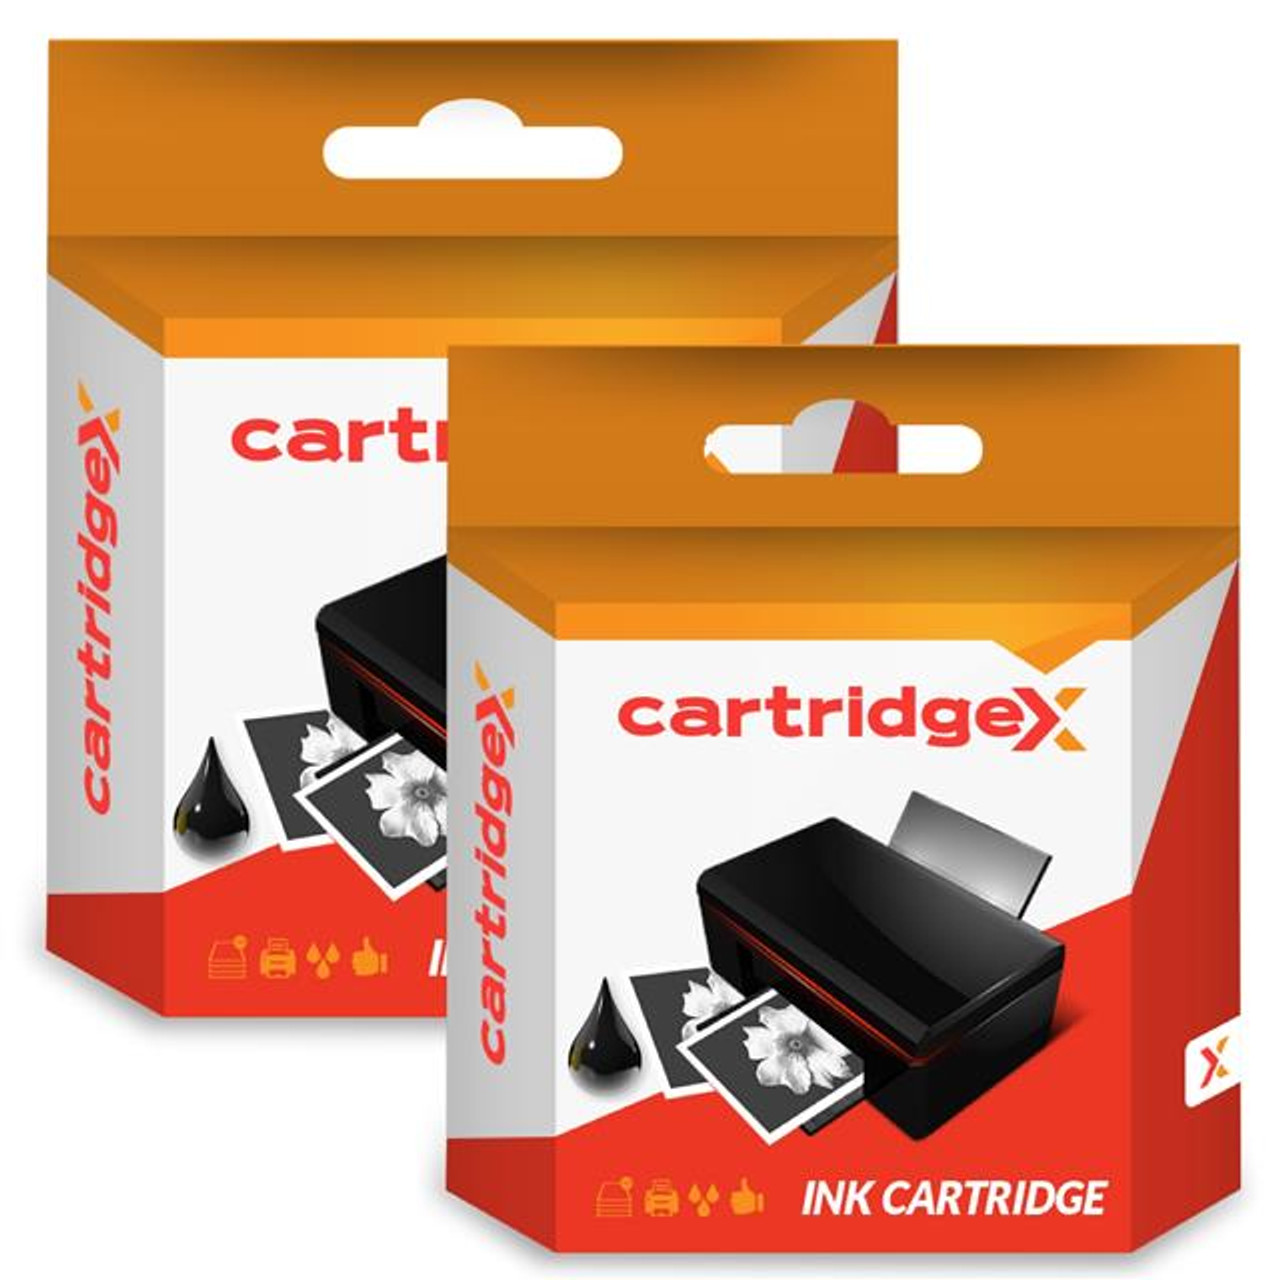 2 x Black Ink Cartridge Compatible With Epson WorkForce WF